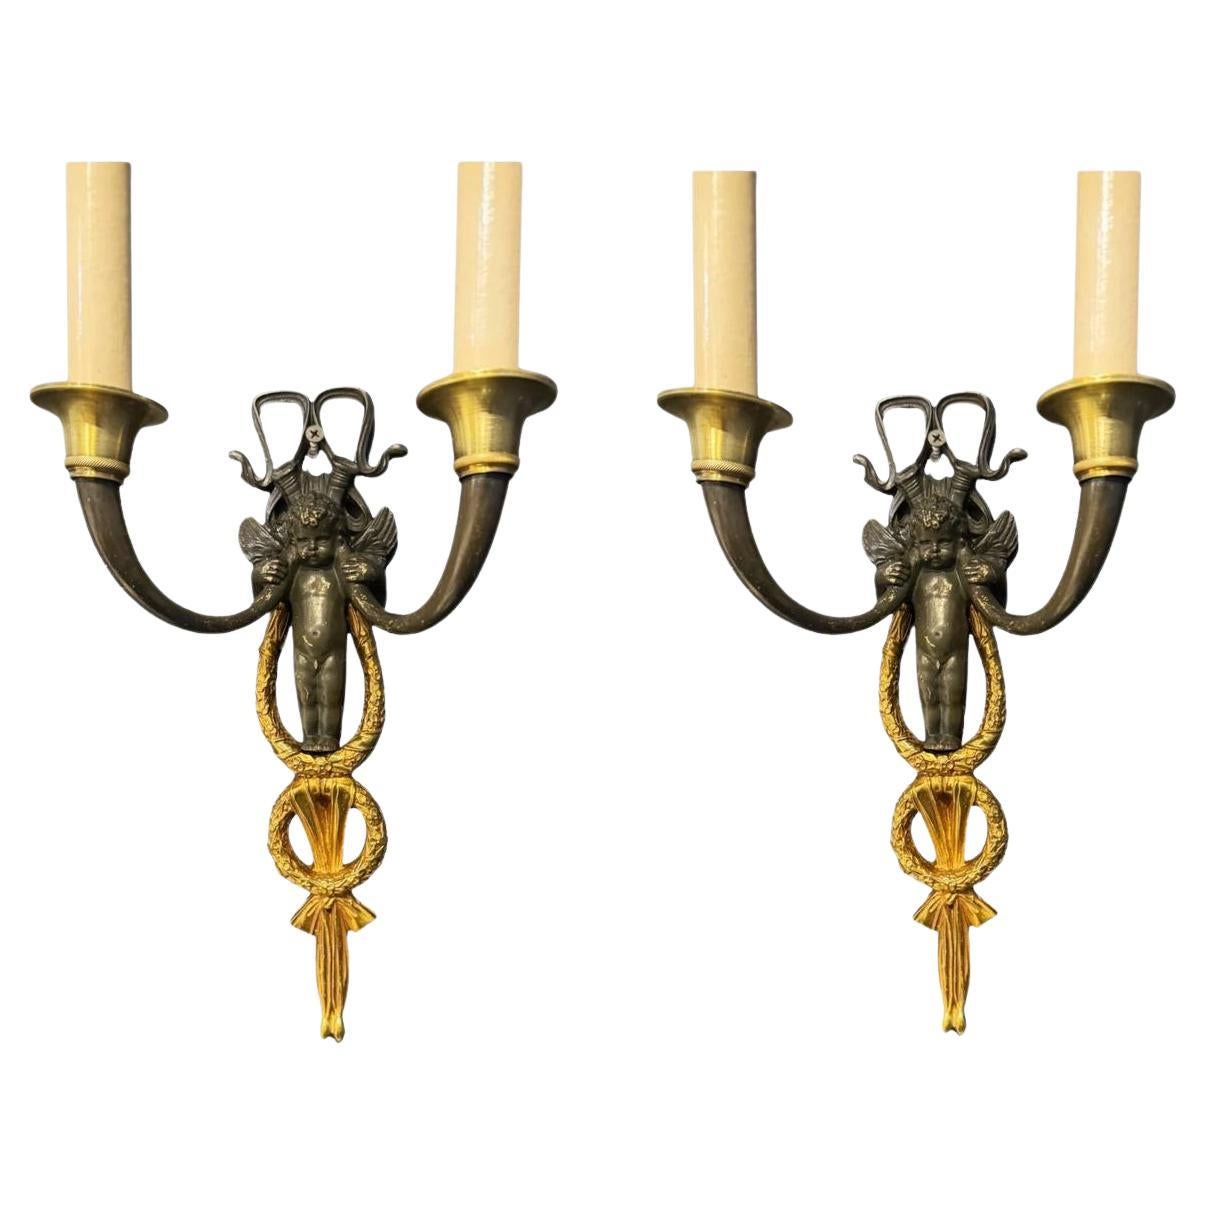 Pair of Late 19th Century French Empire Cherubs Sconces